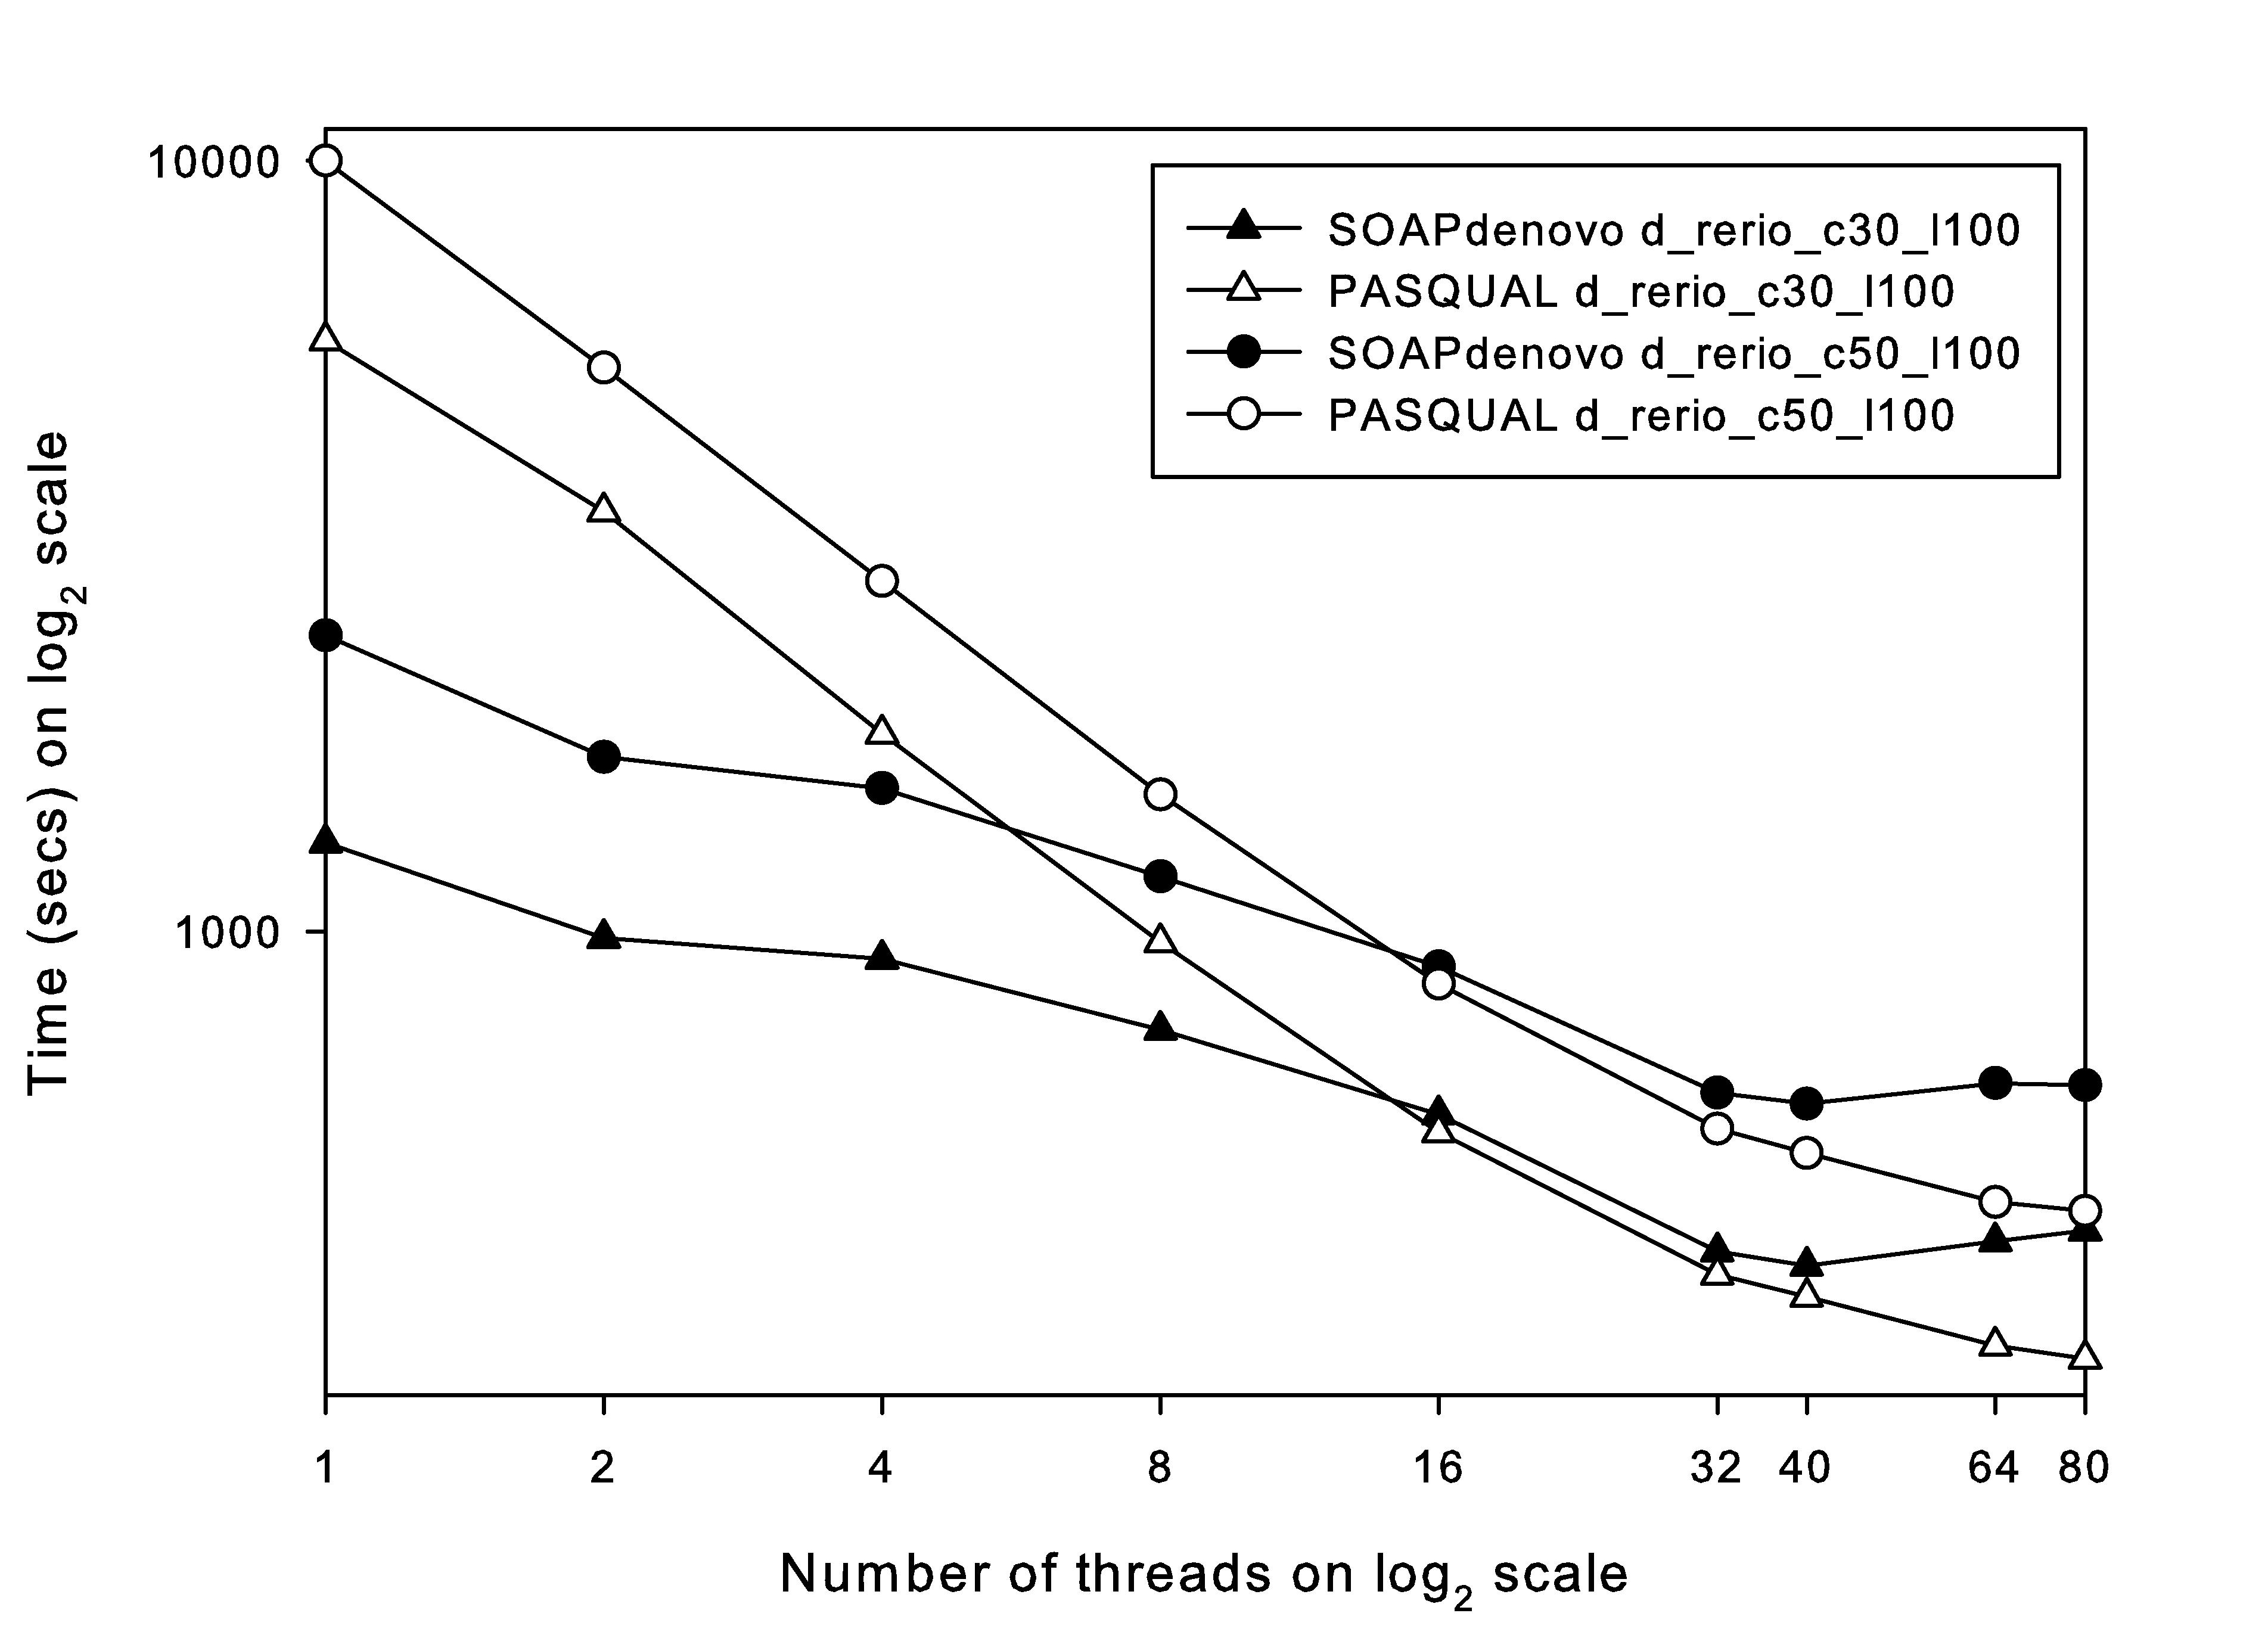 Scaling of PASQUAL and SOAPdenovo